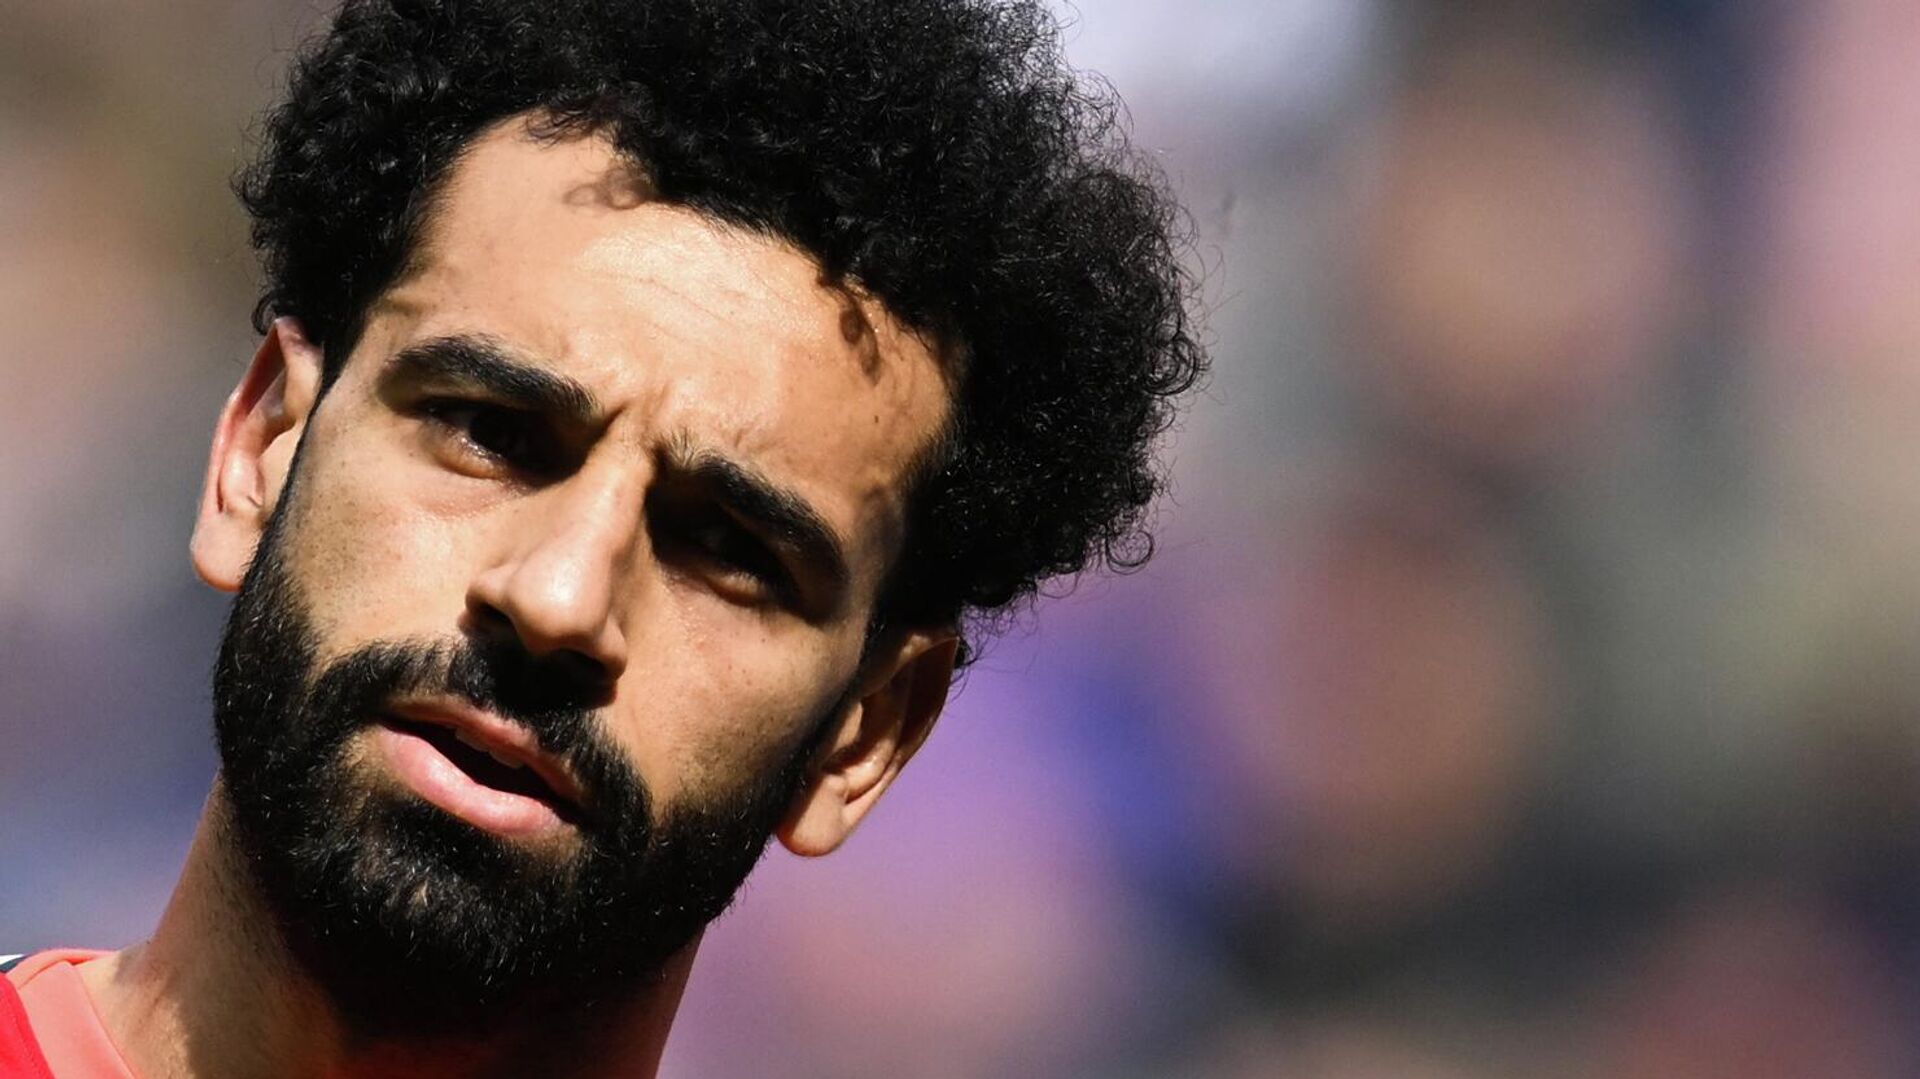 Liverpool's Egyptian midfielder Mohamed Salah reacts during the English Premier League football match between Newcastle United and Liverpool at St James' Park in Newcastle-upon-Tyne, north east England on April 30, 2022.  - Sputnik International, 1920, 02.05.2022